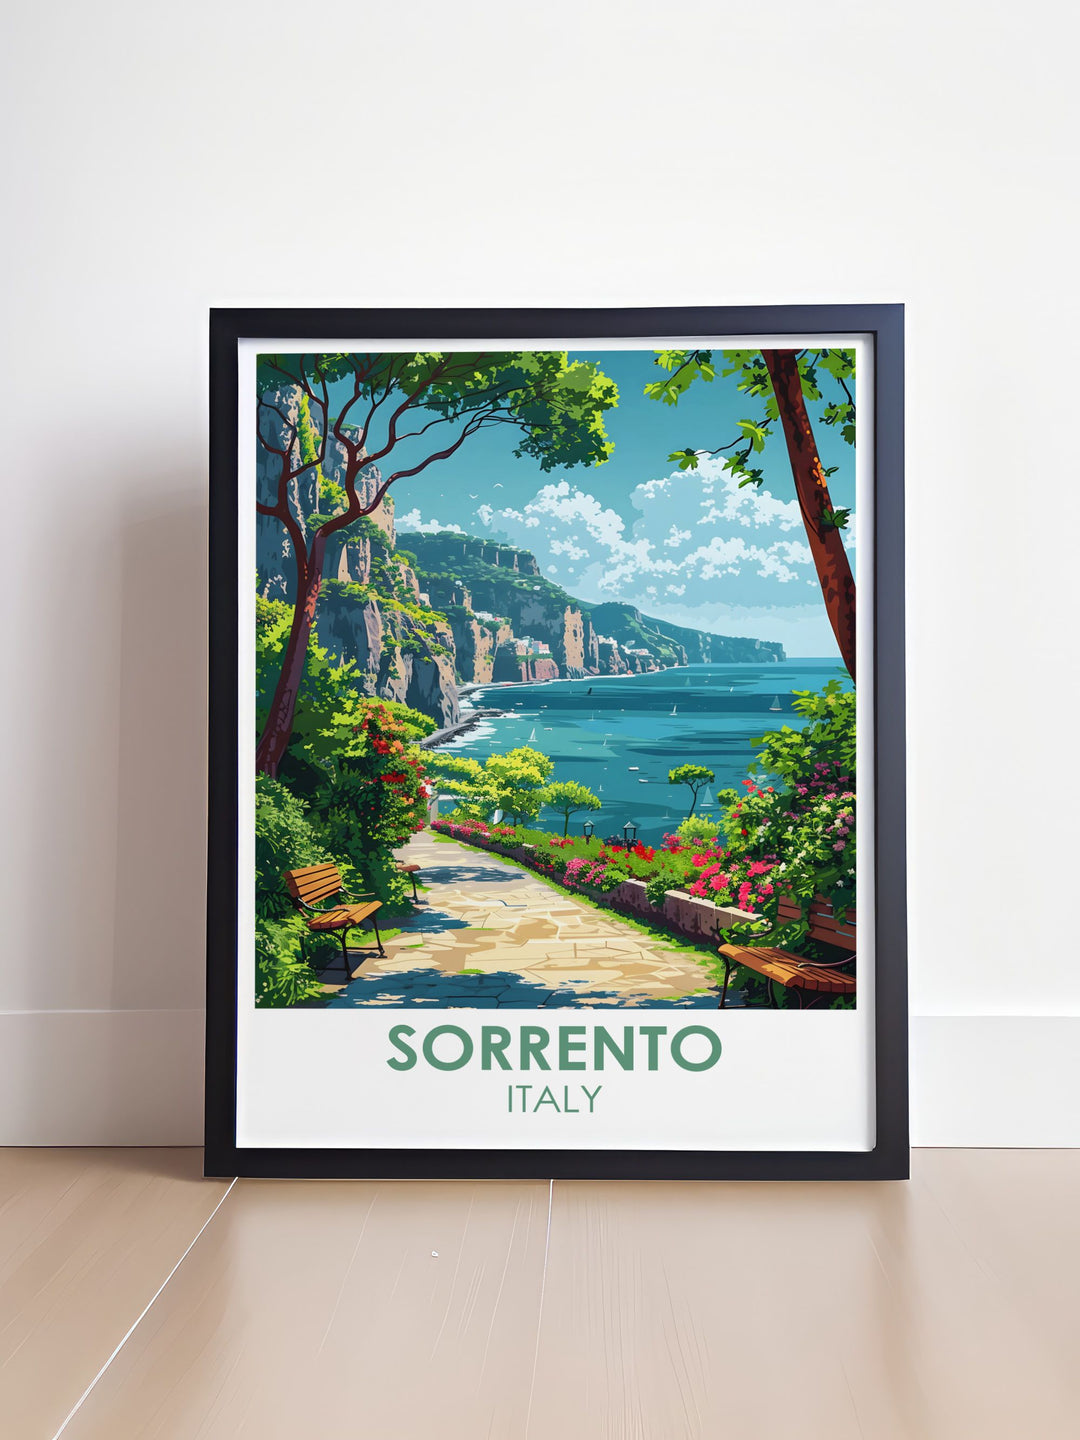 Sorrento print highlighting Villa Comunale Park and its stunning views of Mount Vesuvius. Vibrant Sorrento travel poster ideal for anyone who loves Italy and wants to bring a piece of its serene beauty into their home or office decor.